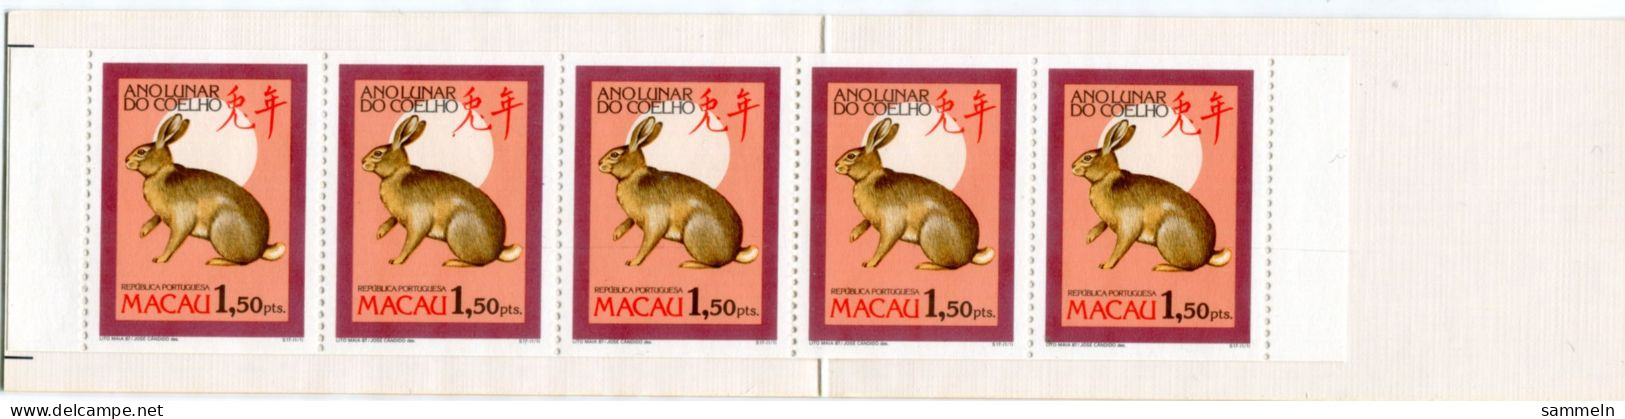 MACAO 568 C MH Mnh - Chinesisches Jahr Des Kaninchens, Chinese Year Of The Rabbit, Année Chinoise Du Lapin - MACAU - Carnets